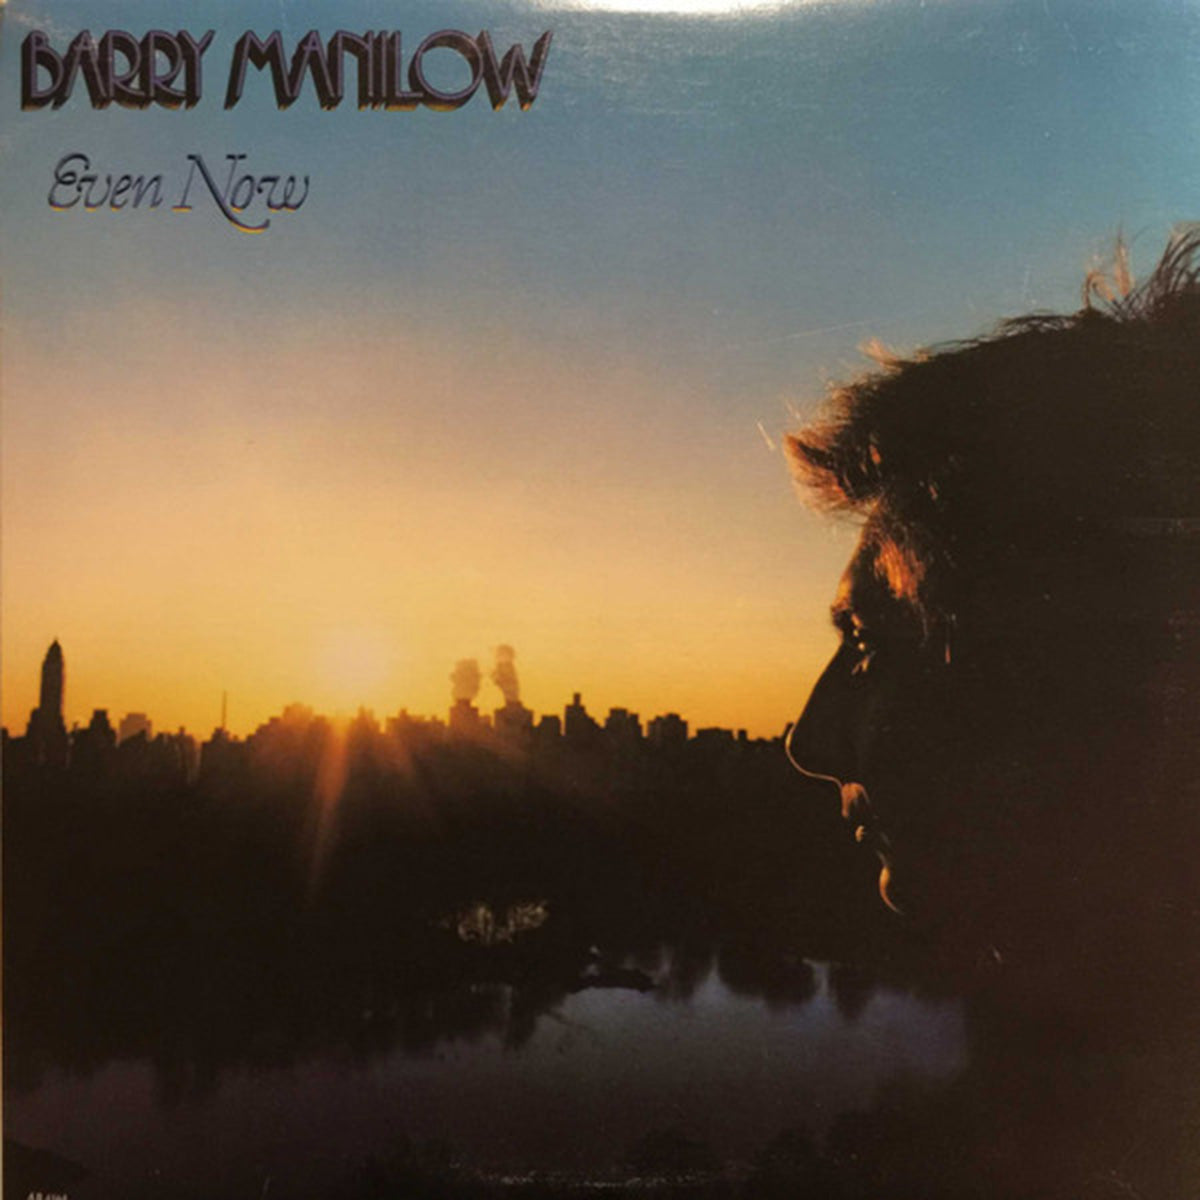 Barry Manilow – Even Now - 1978